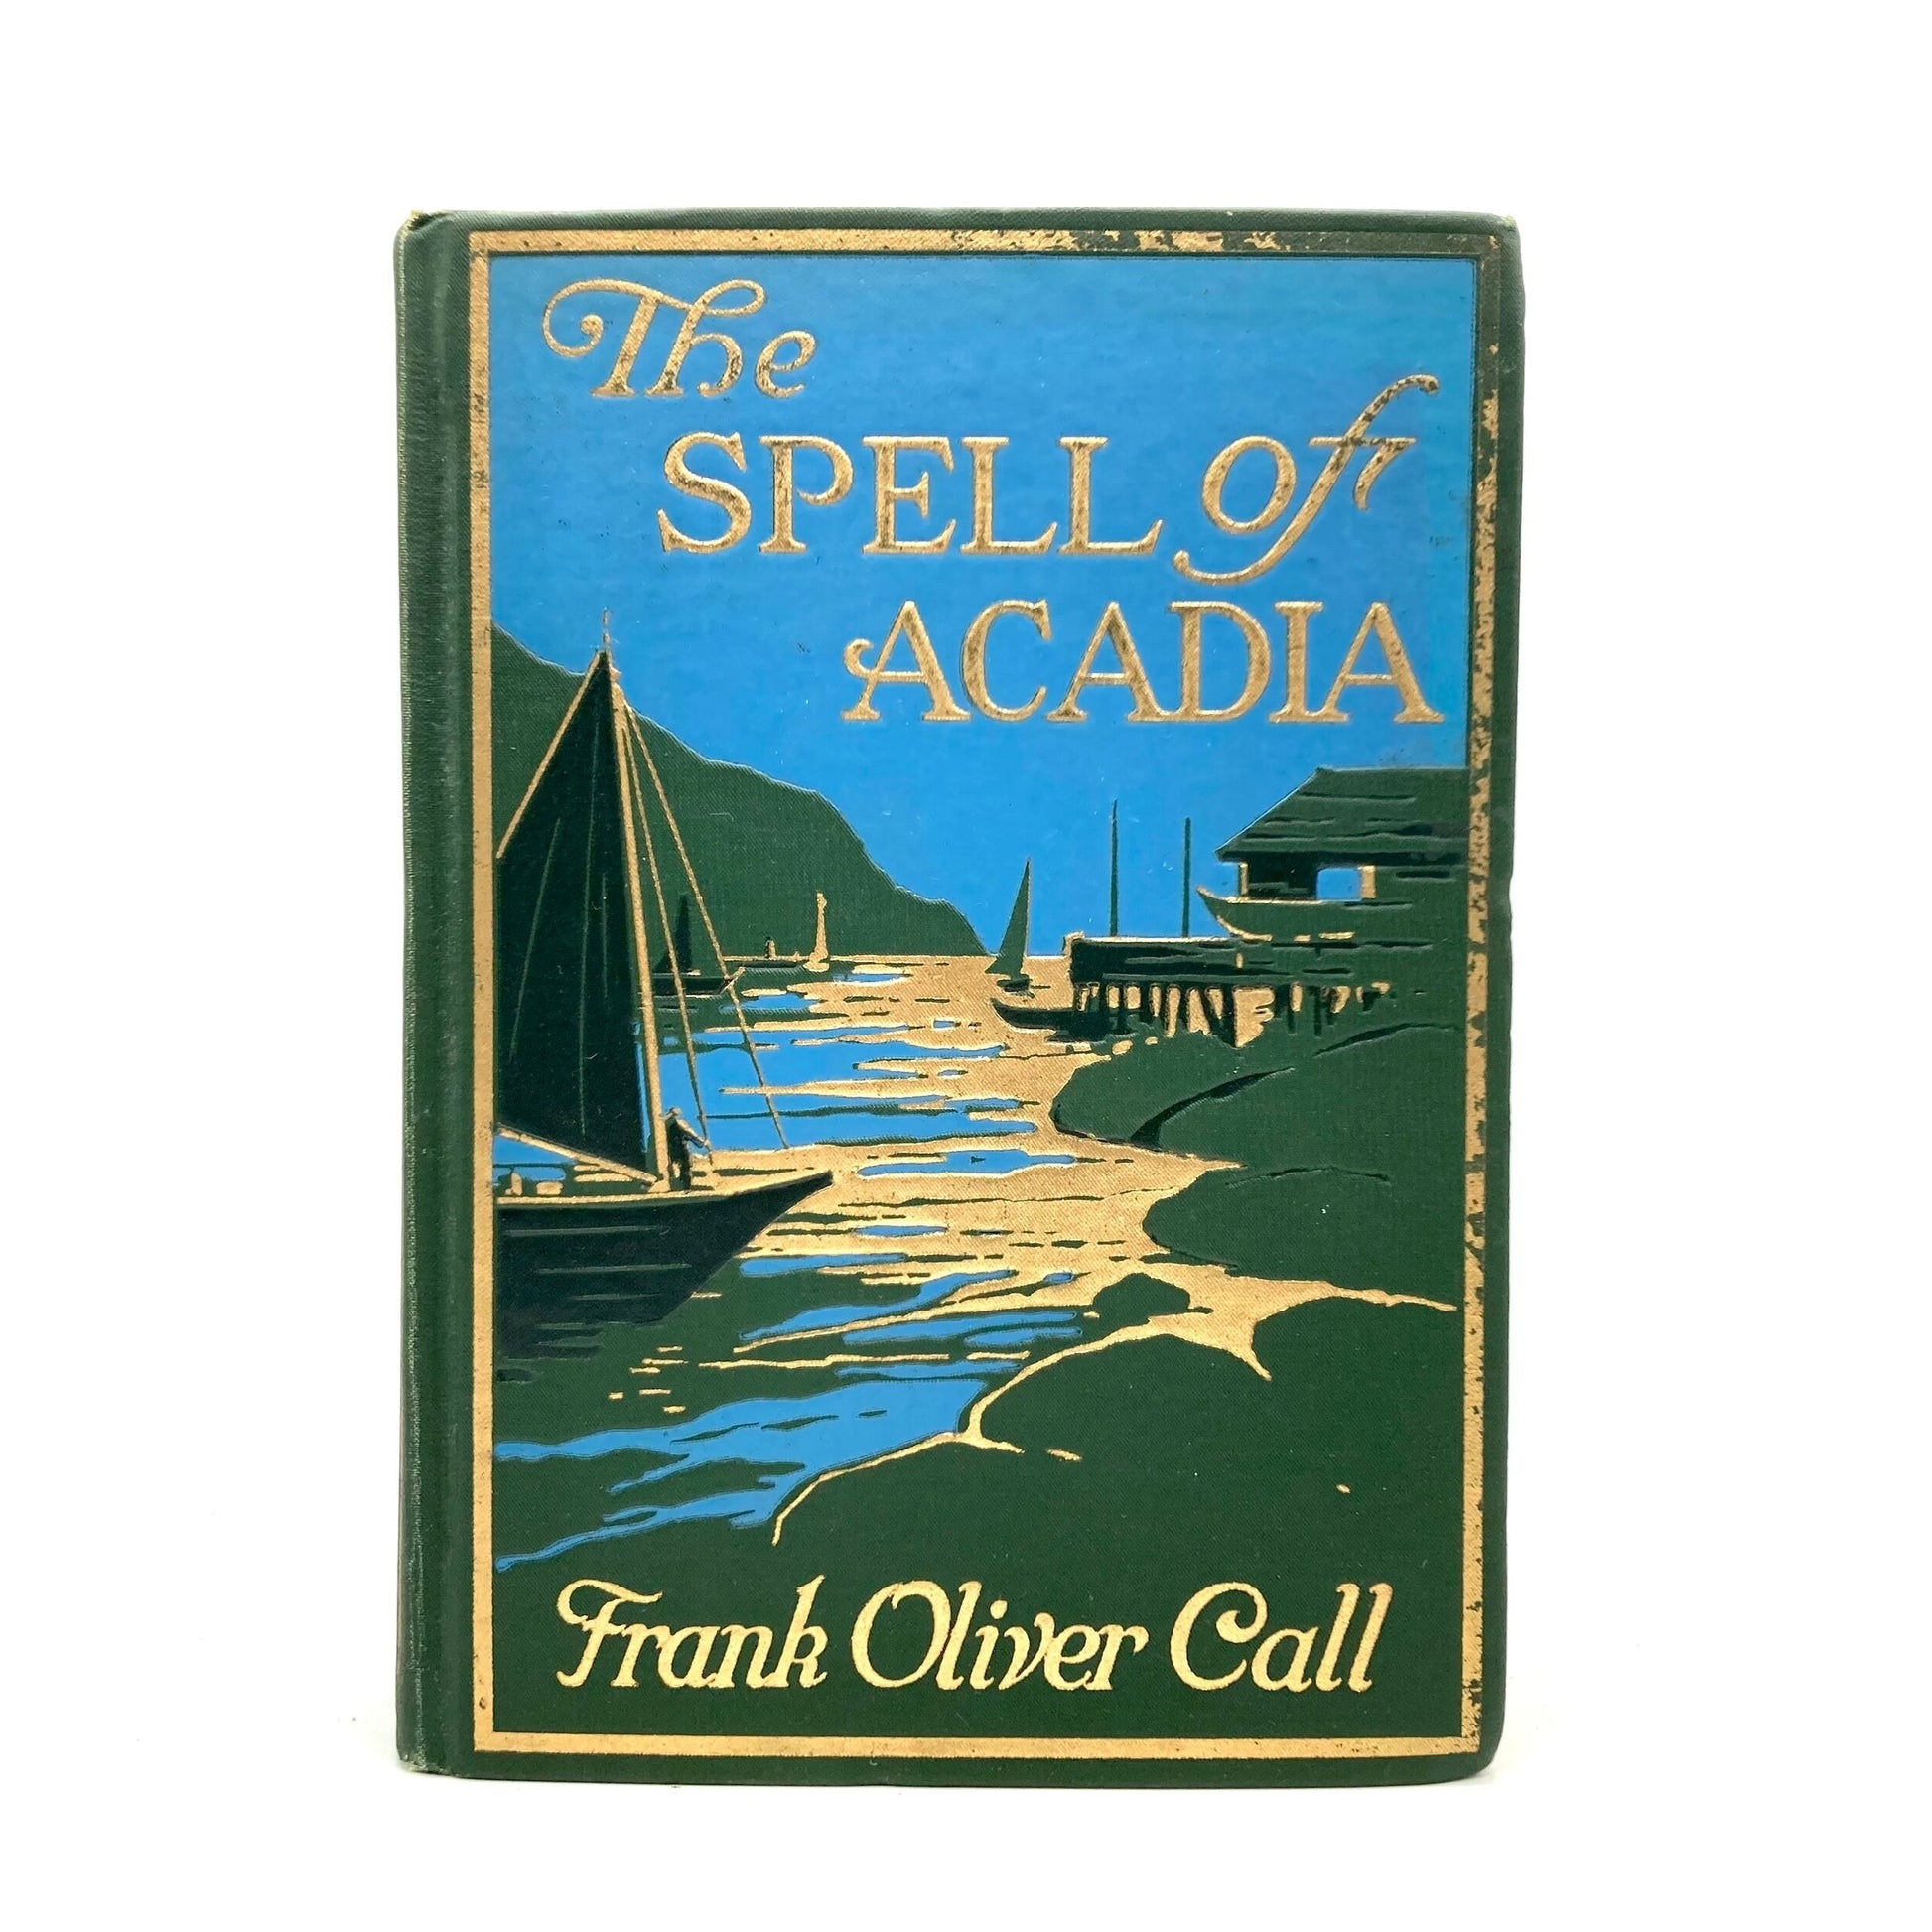 CALL, Frank Oliver "The Spell of Acadia" [LC Page, 1930] - Buzz Bookstore